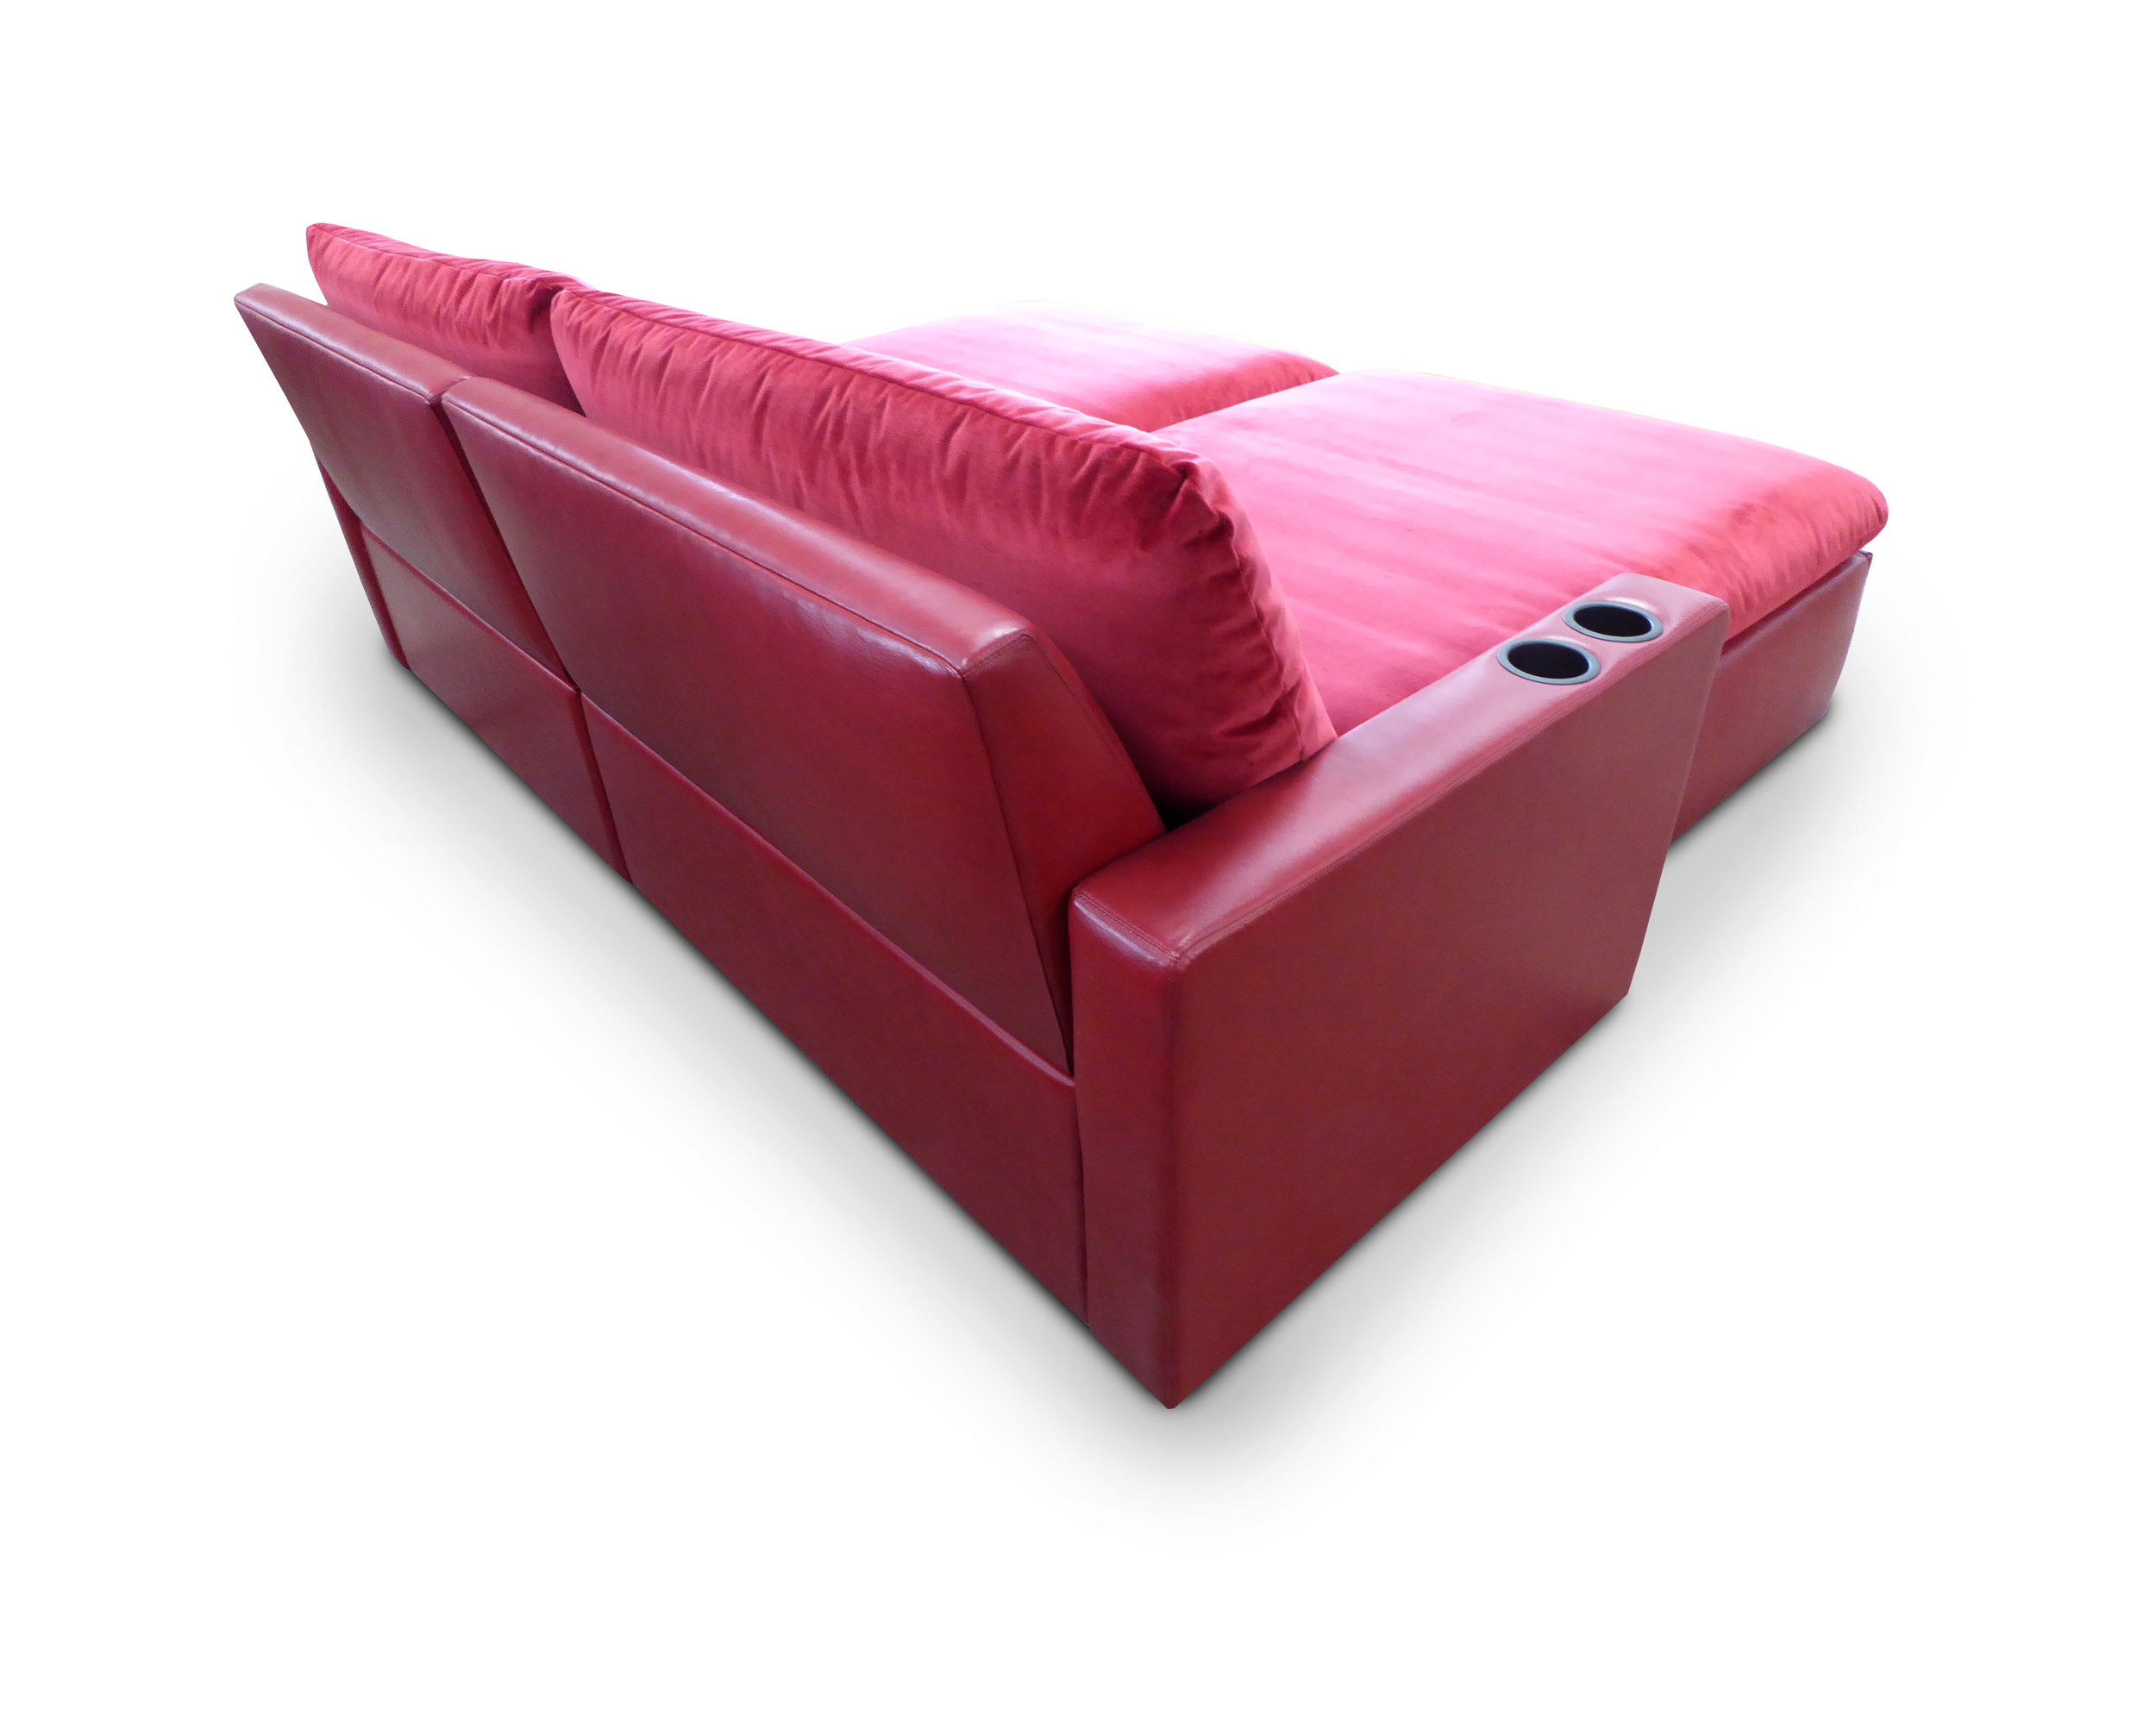 red-lounger-2cup-back.jpg